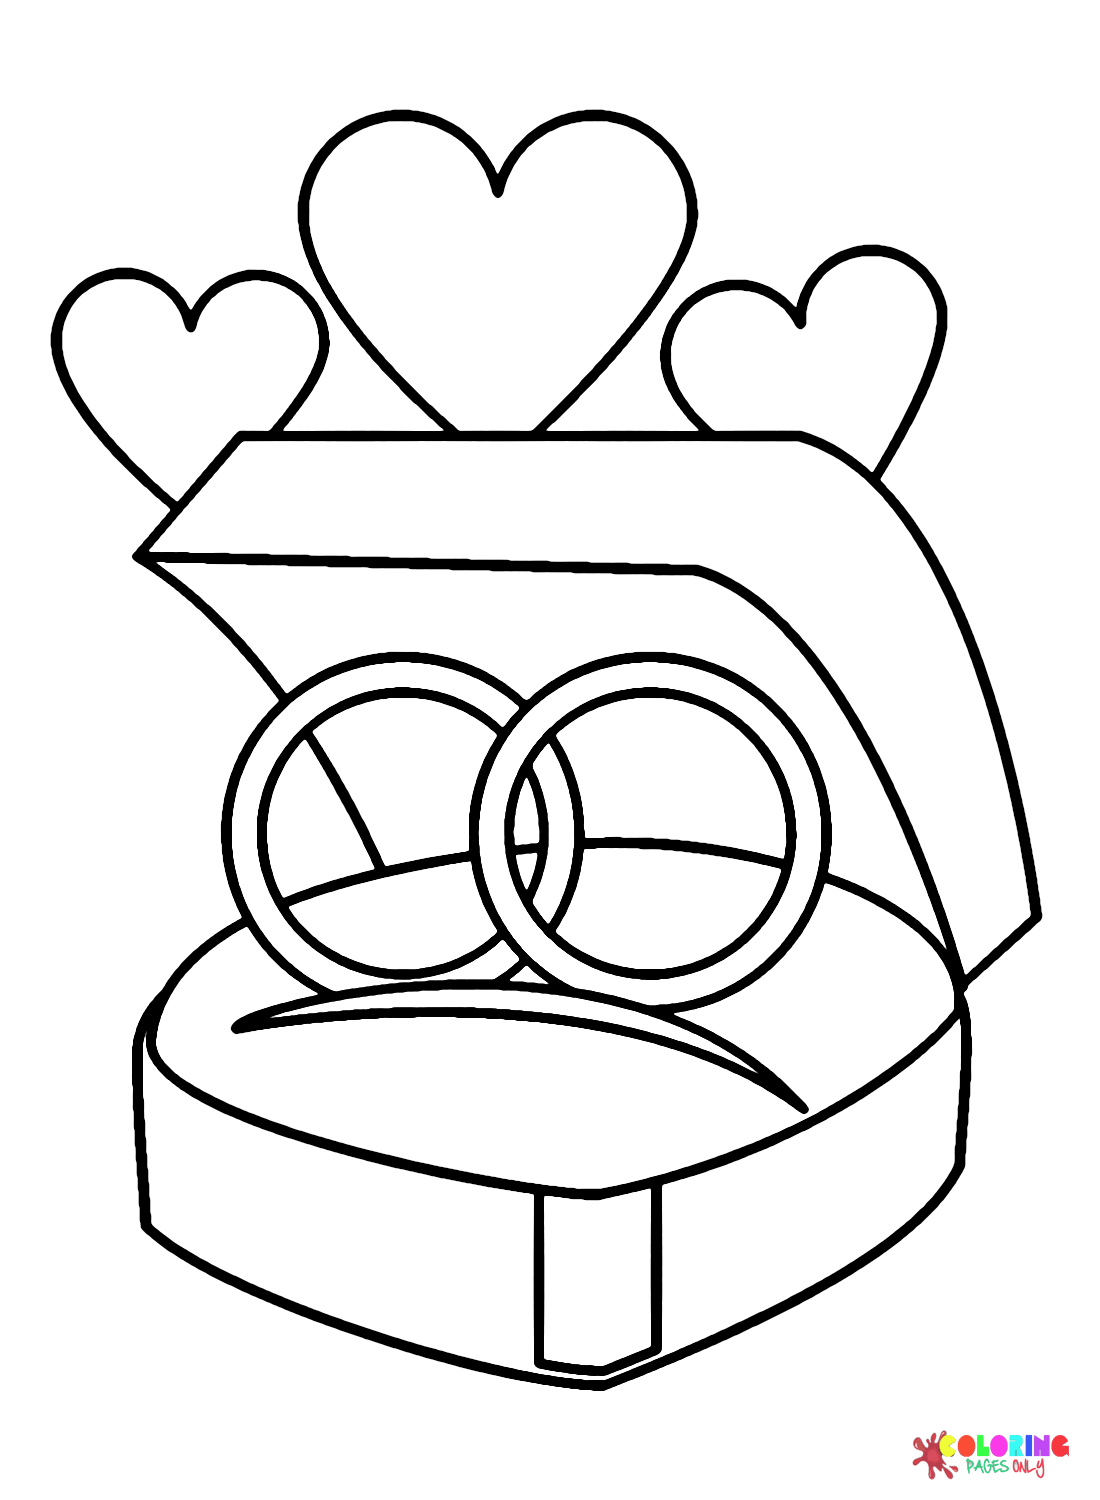 Wedding Rings in Box Coloring Page